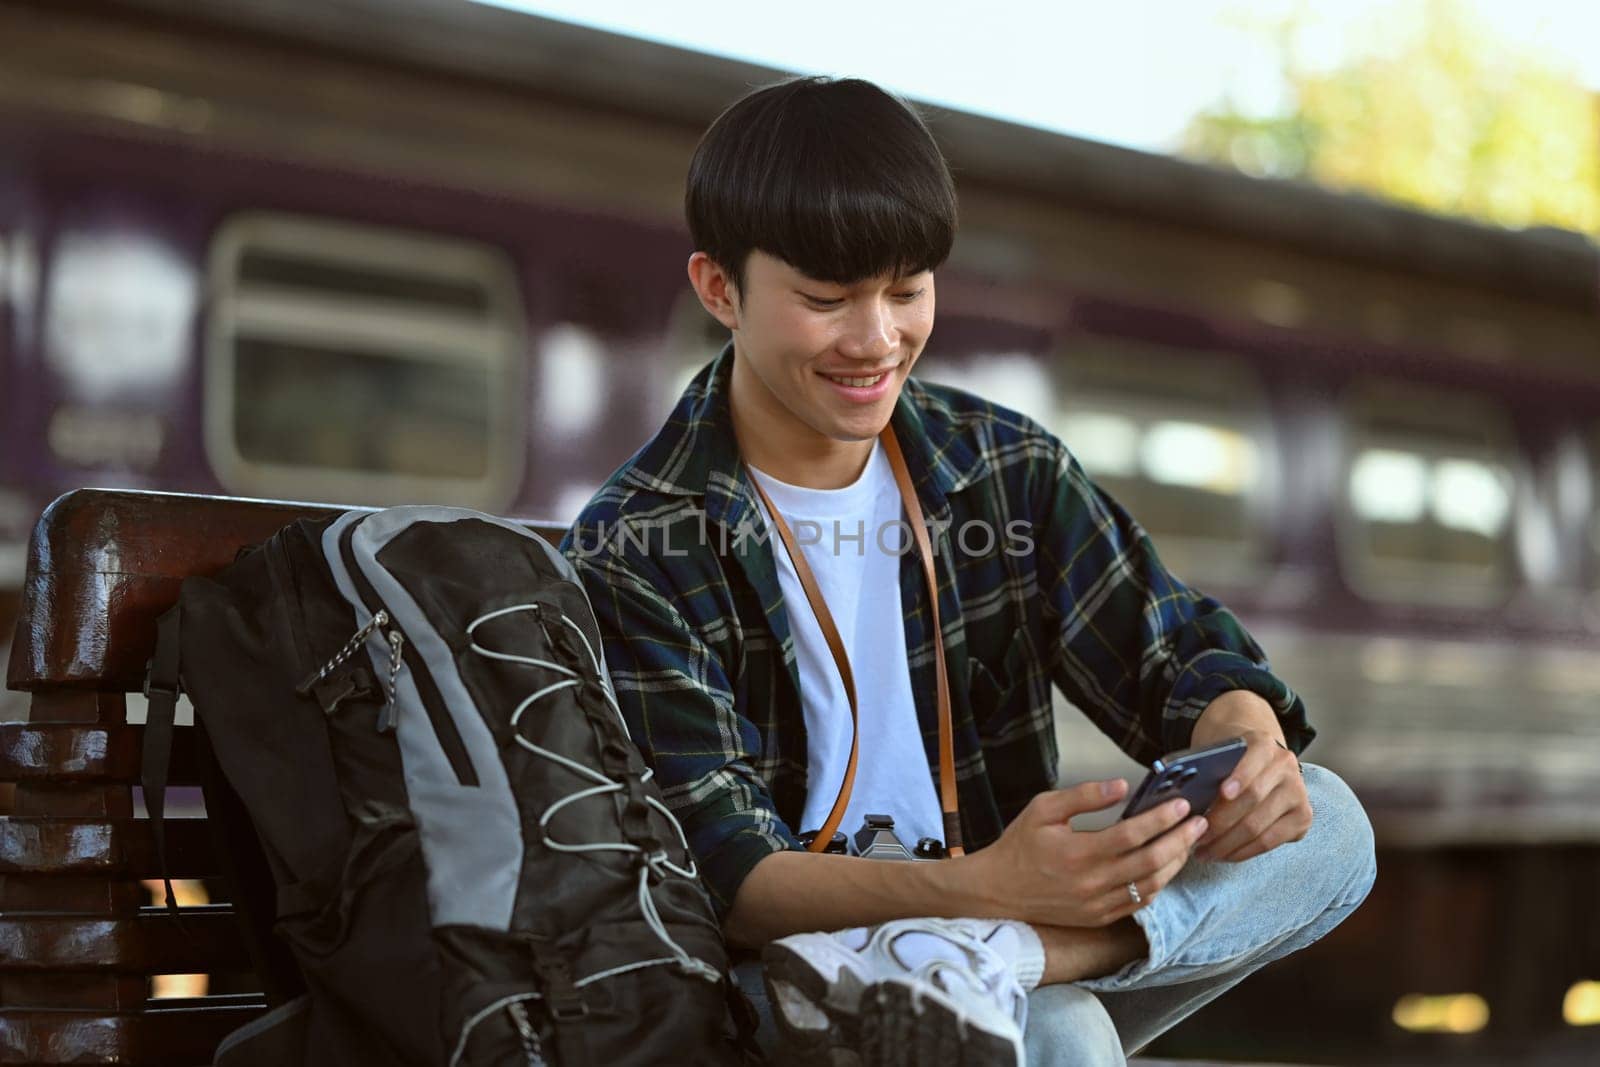 Smiling Asian male sitting on bench waiting for train and using mobile phone. Travel and lifestyle concept.